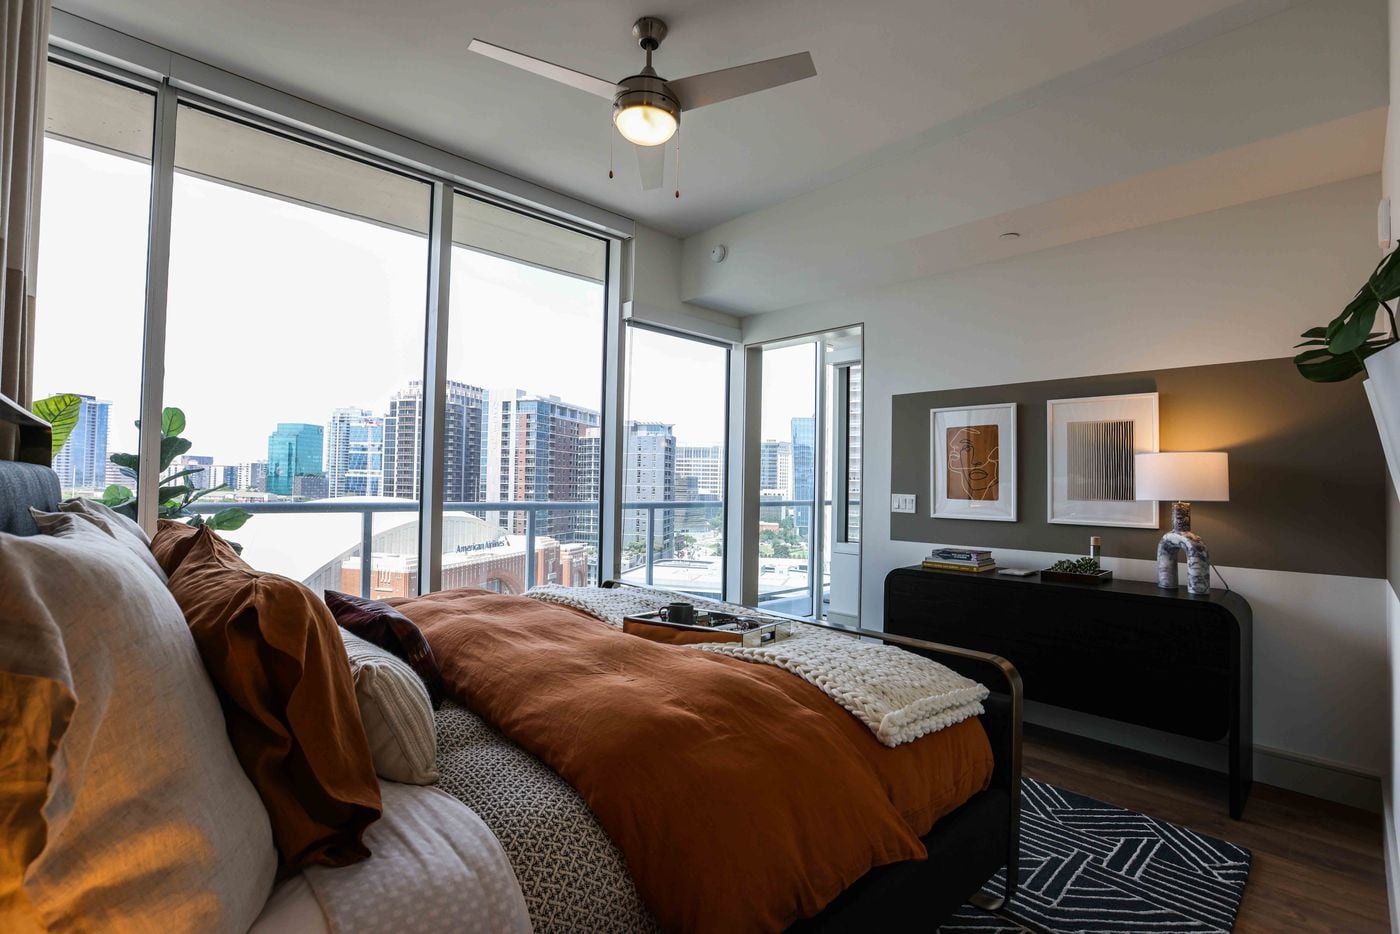 Main bedroom in a 2 beds 2 bath apartment at The Victor in Dallas. (Lola Gomez / The Dallas Morning News)